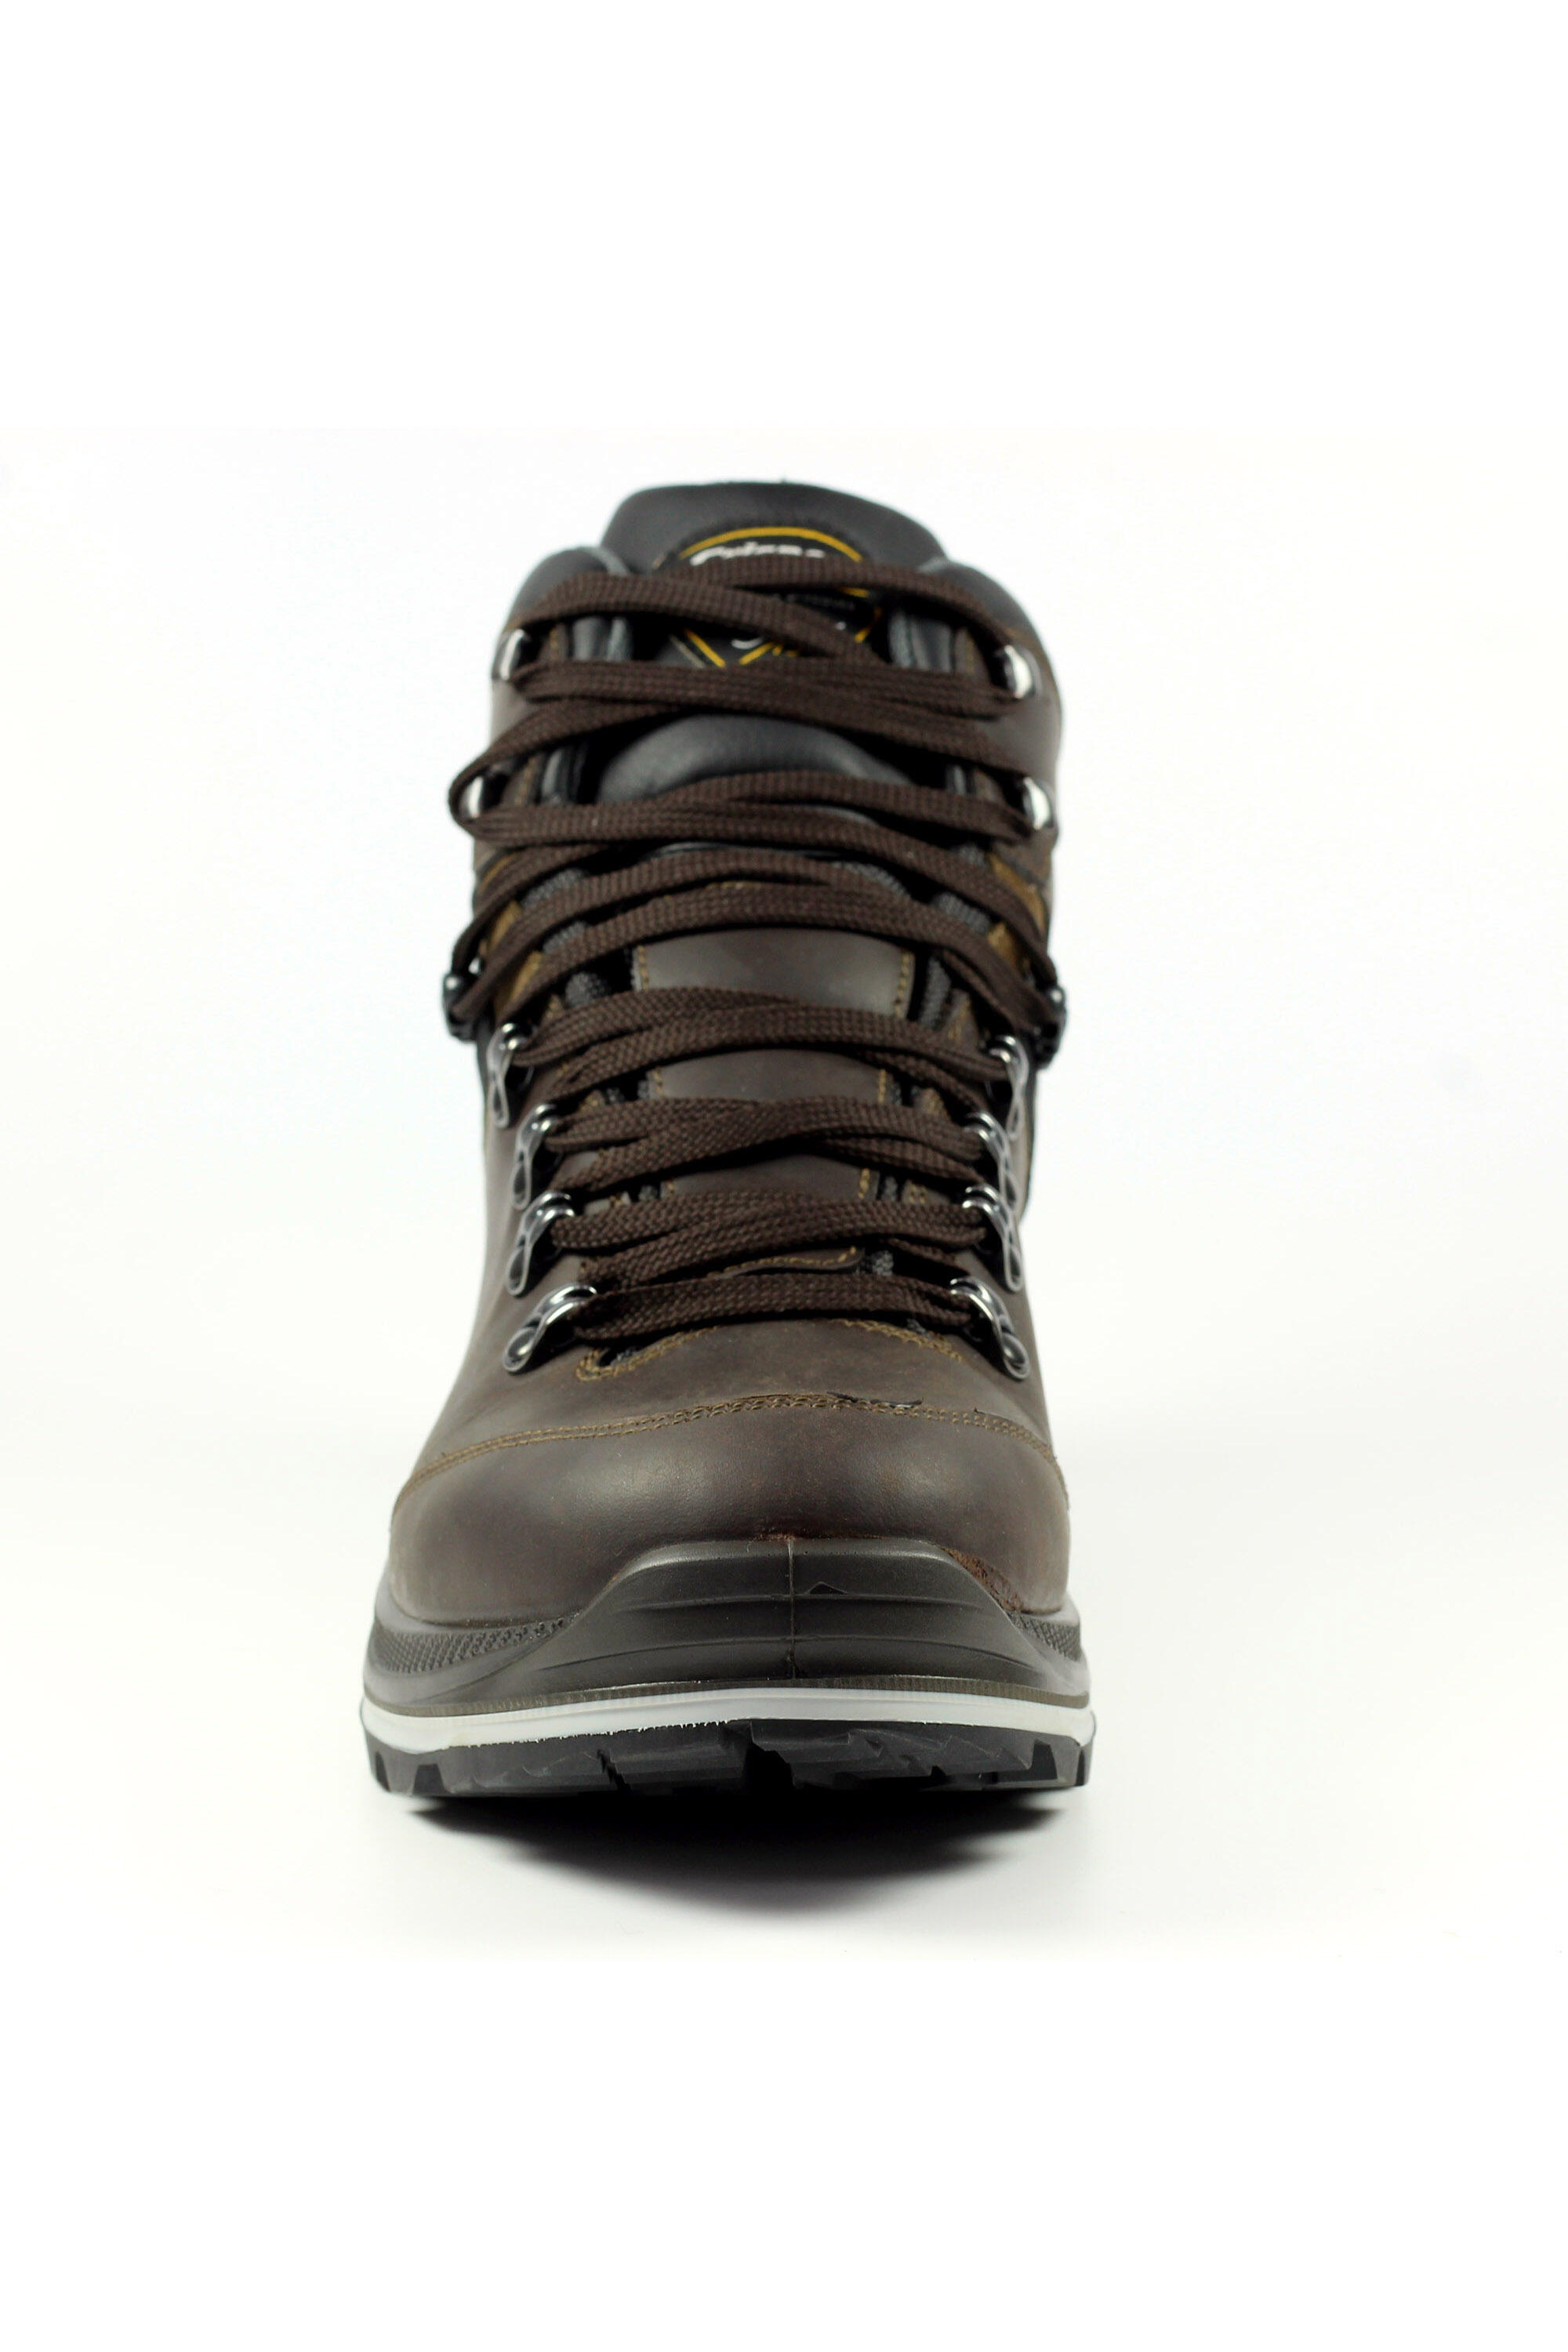 Snowdon Brown Wide Fit Boot 4/7